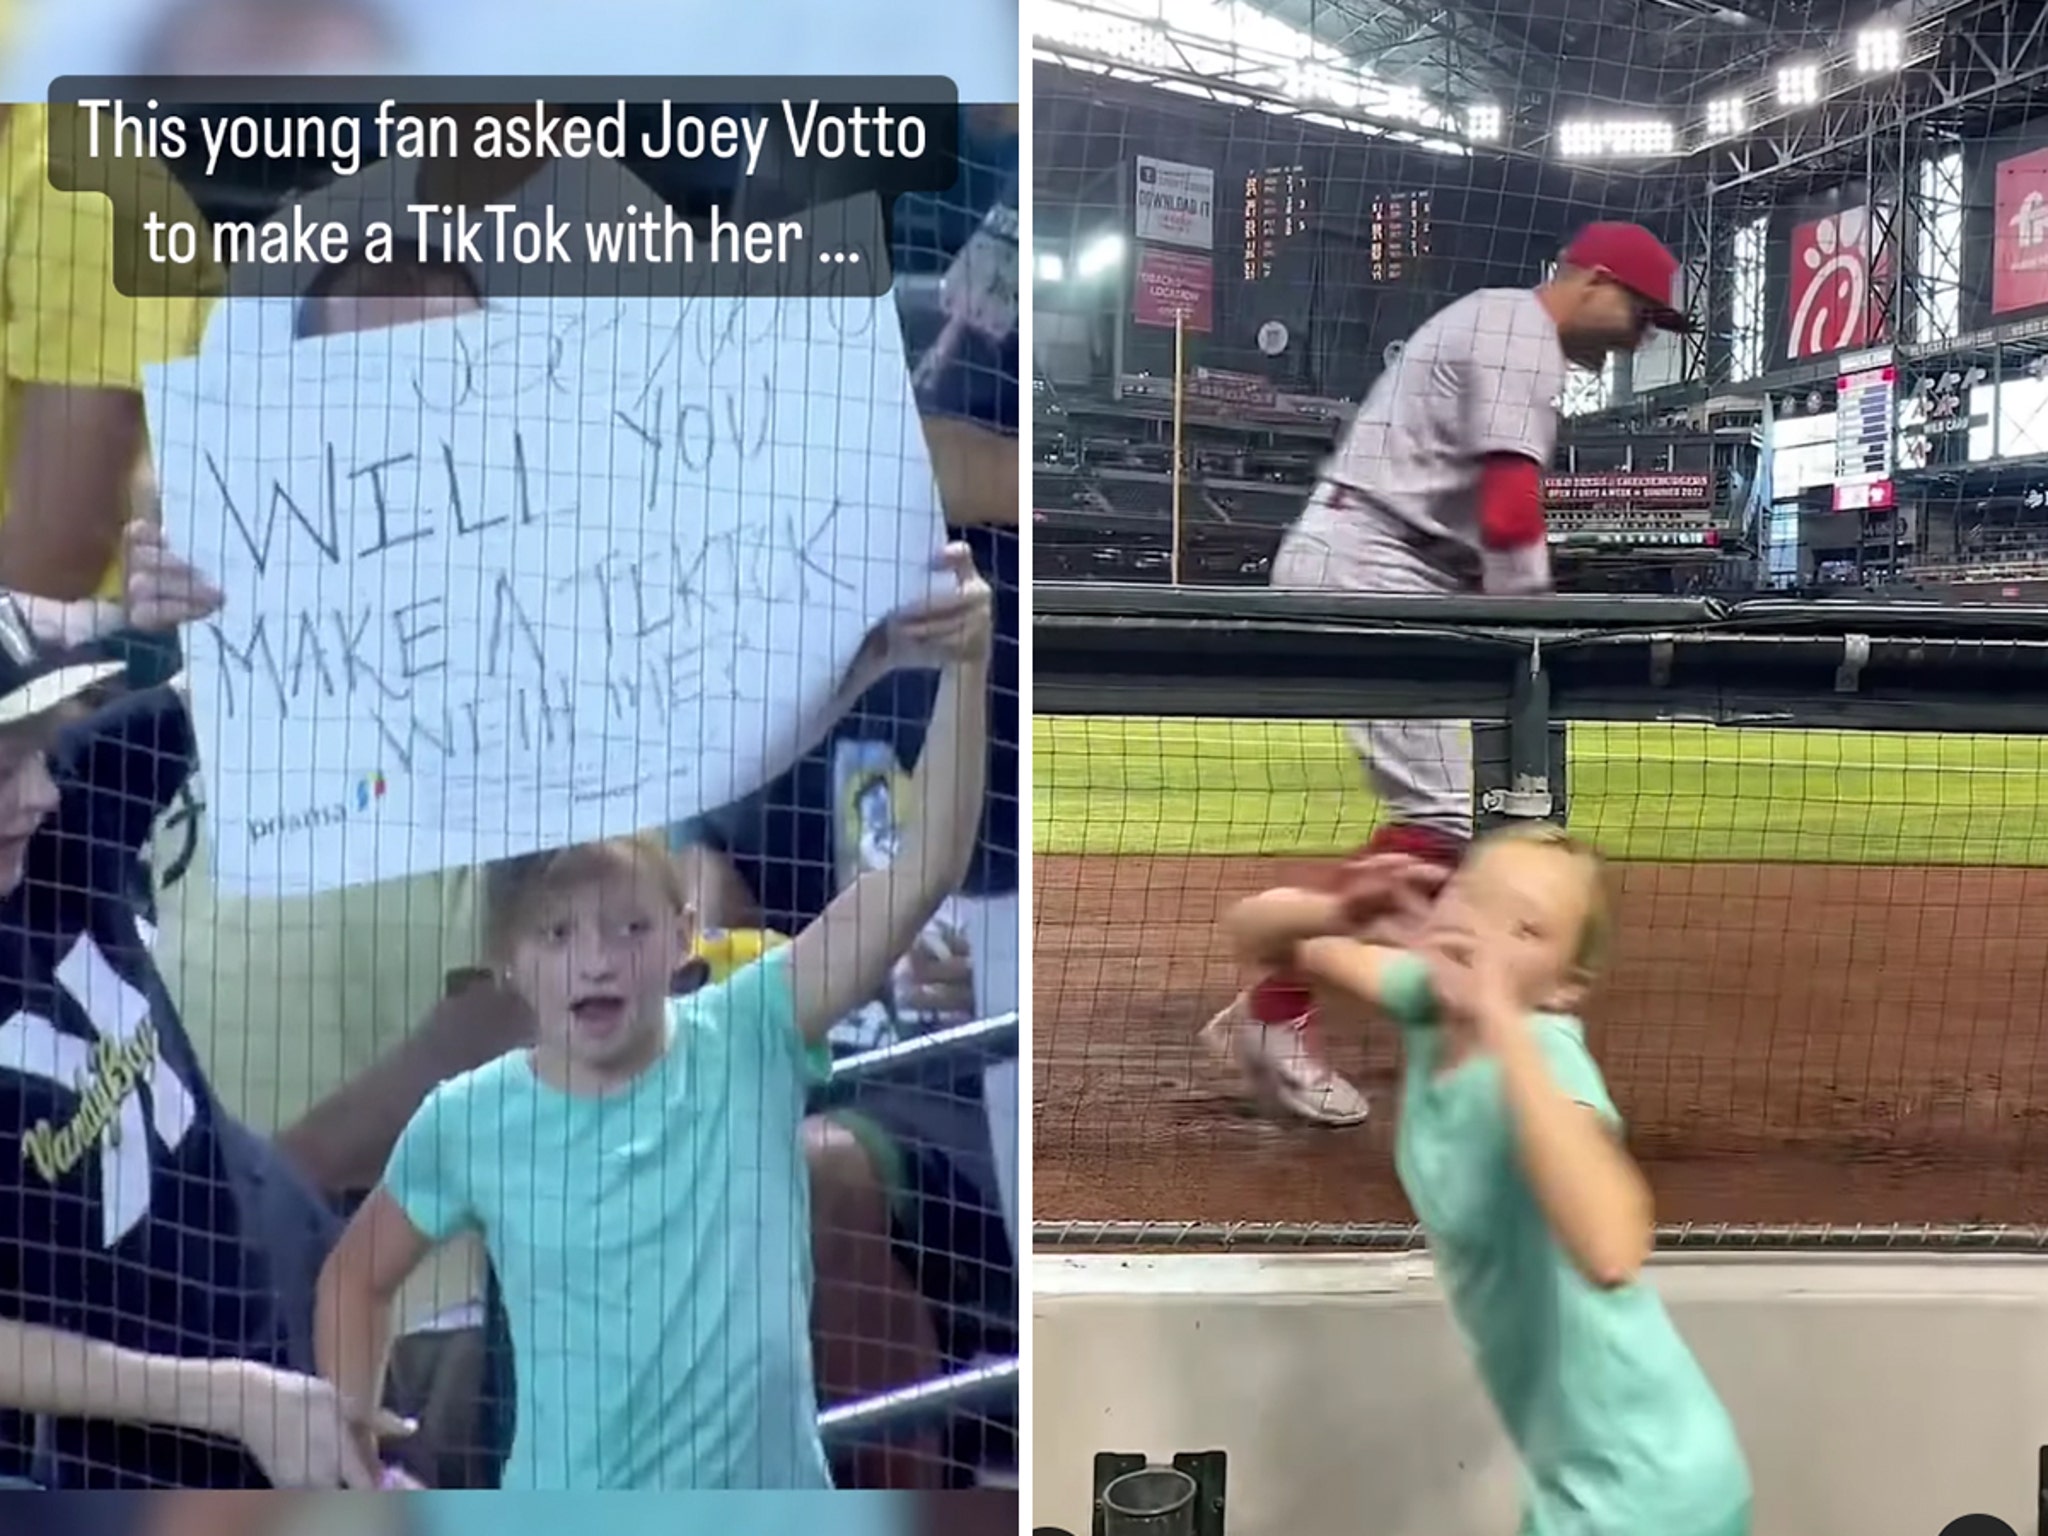 Joey Votto makes a TikTok with young fan, 06/13/2022